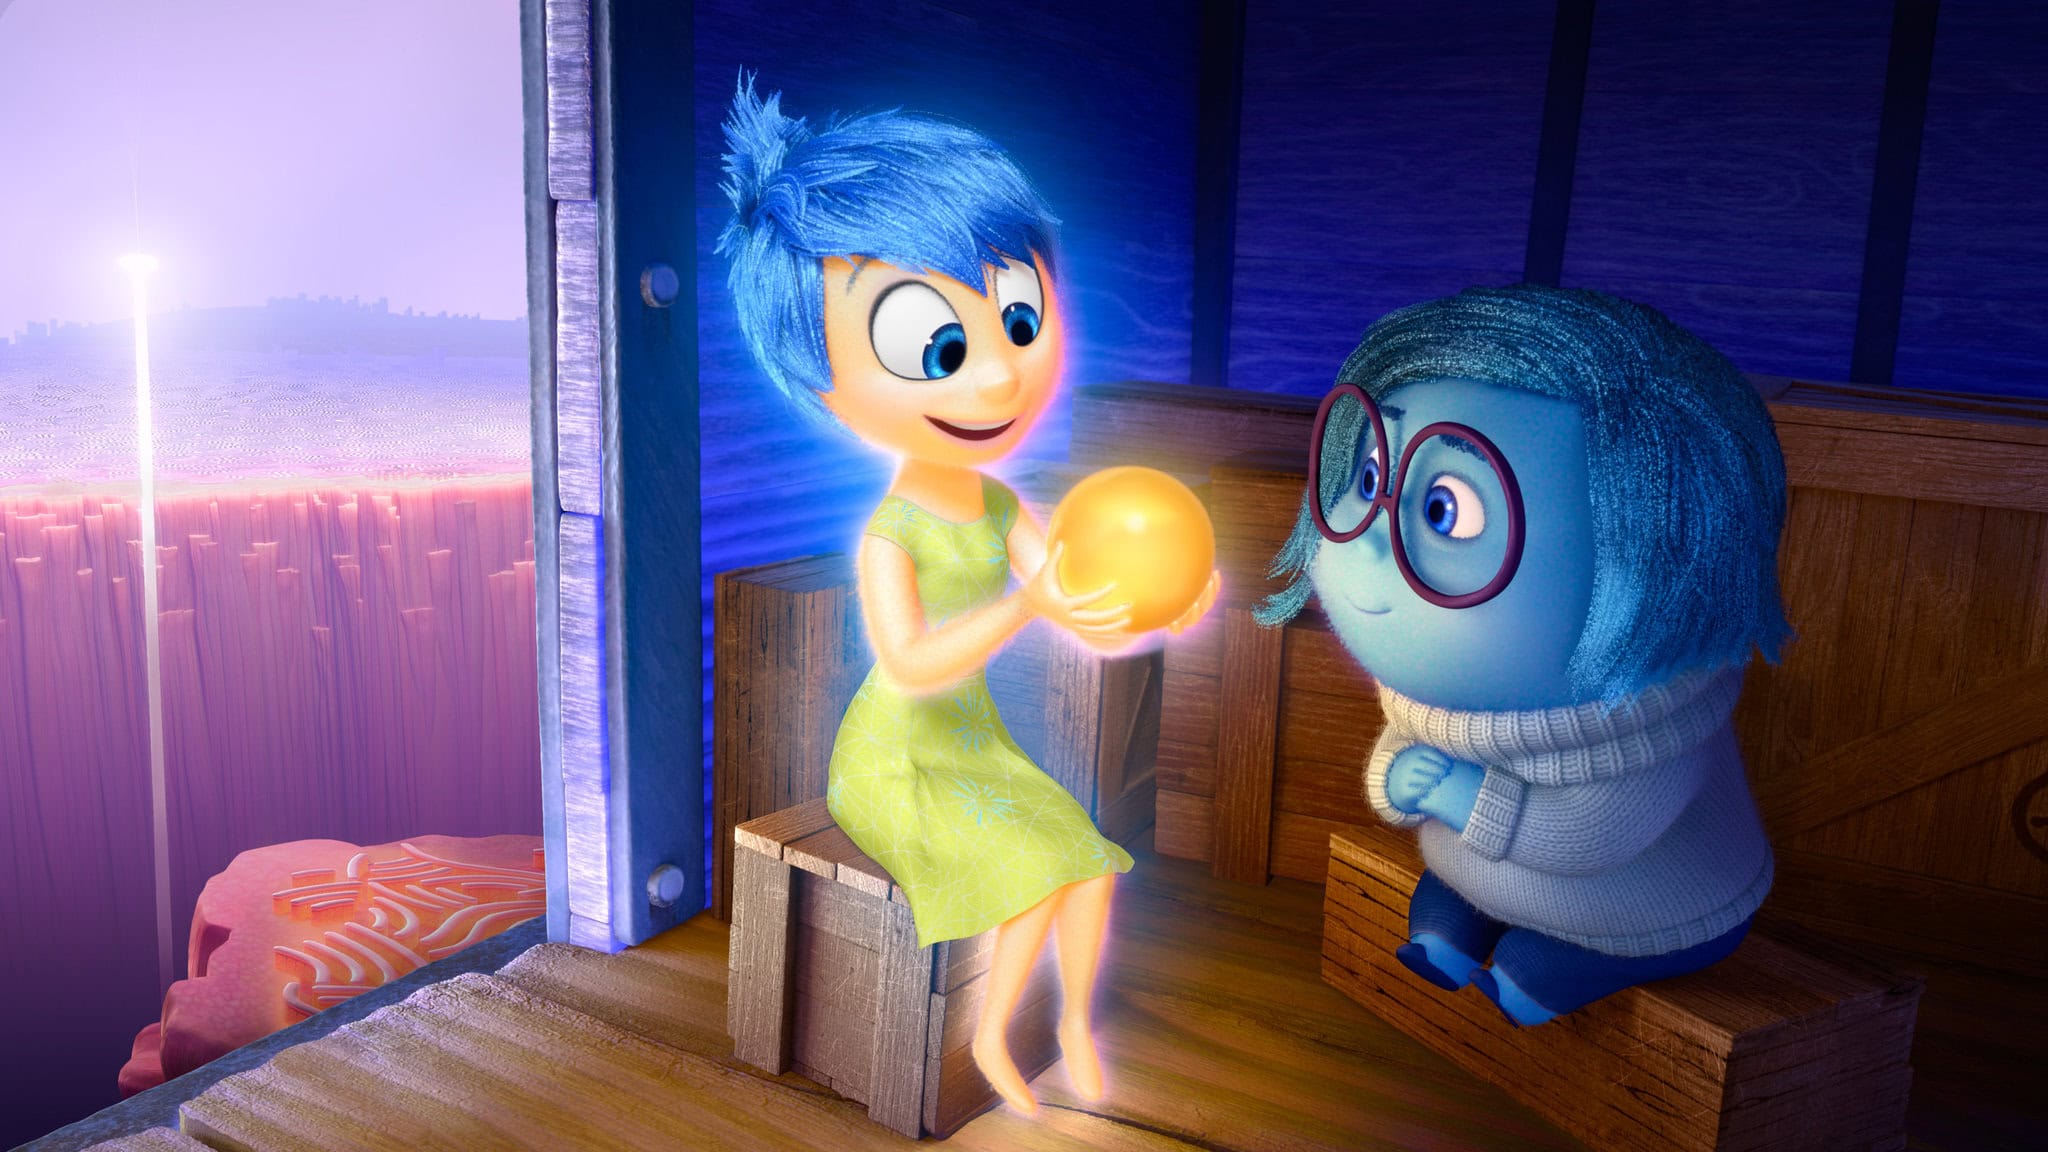 Pixar Explores Sequels for Finding Nemo and The Incredibles Amid Inside Out 2 Anticipation